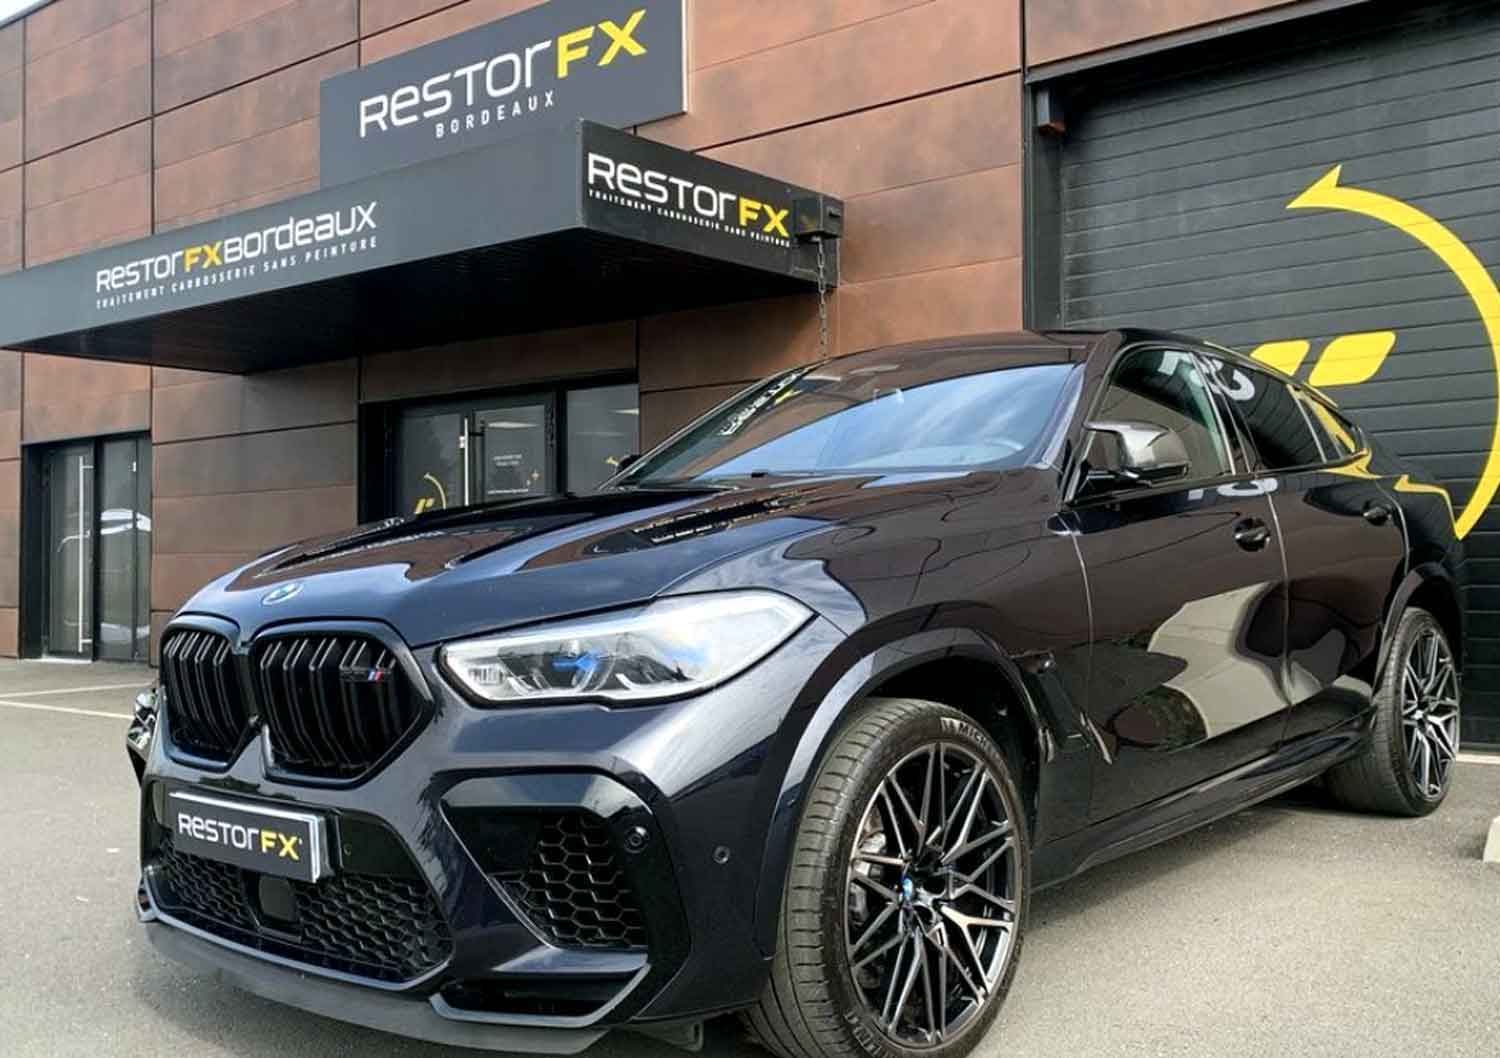 Black BMW SUV parked in front of the RestorFX Bordeaux storefront